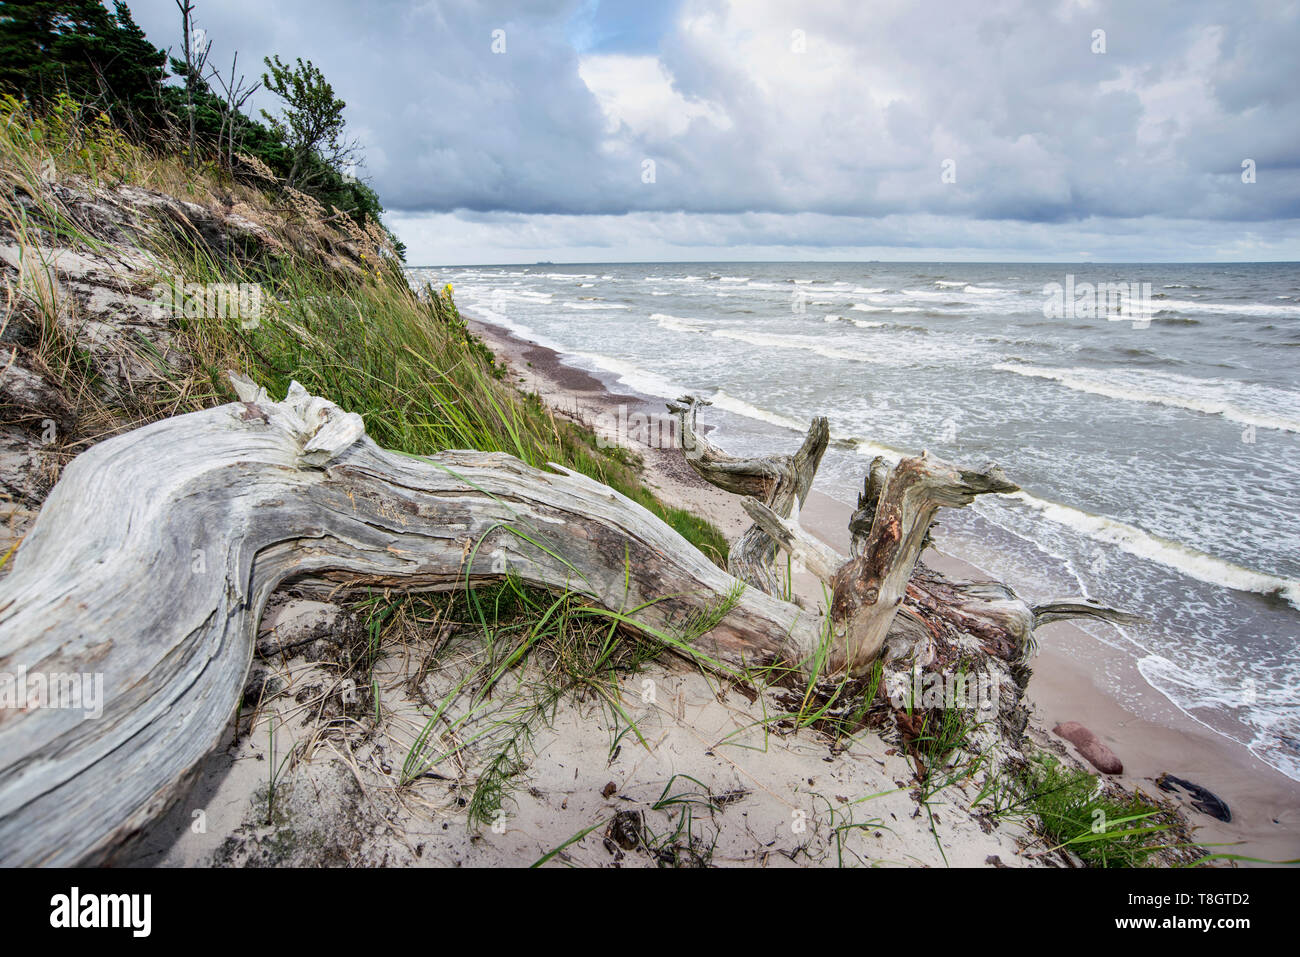 dramatic seacoast landscape with dead tree log on foreground Stock Photo